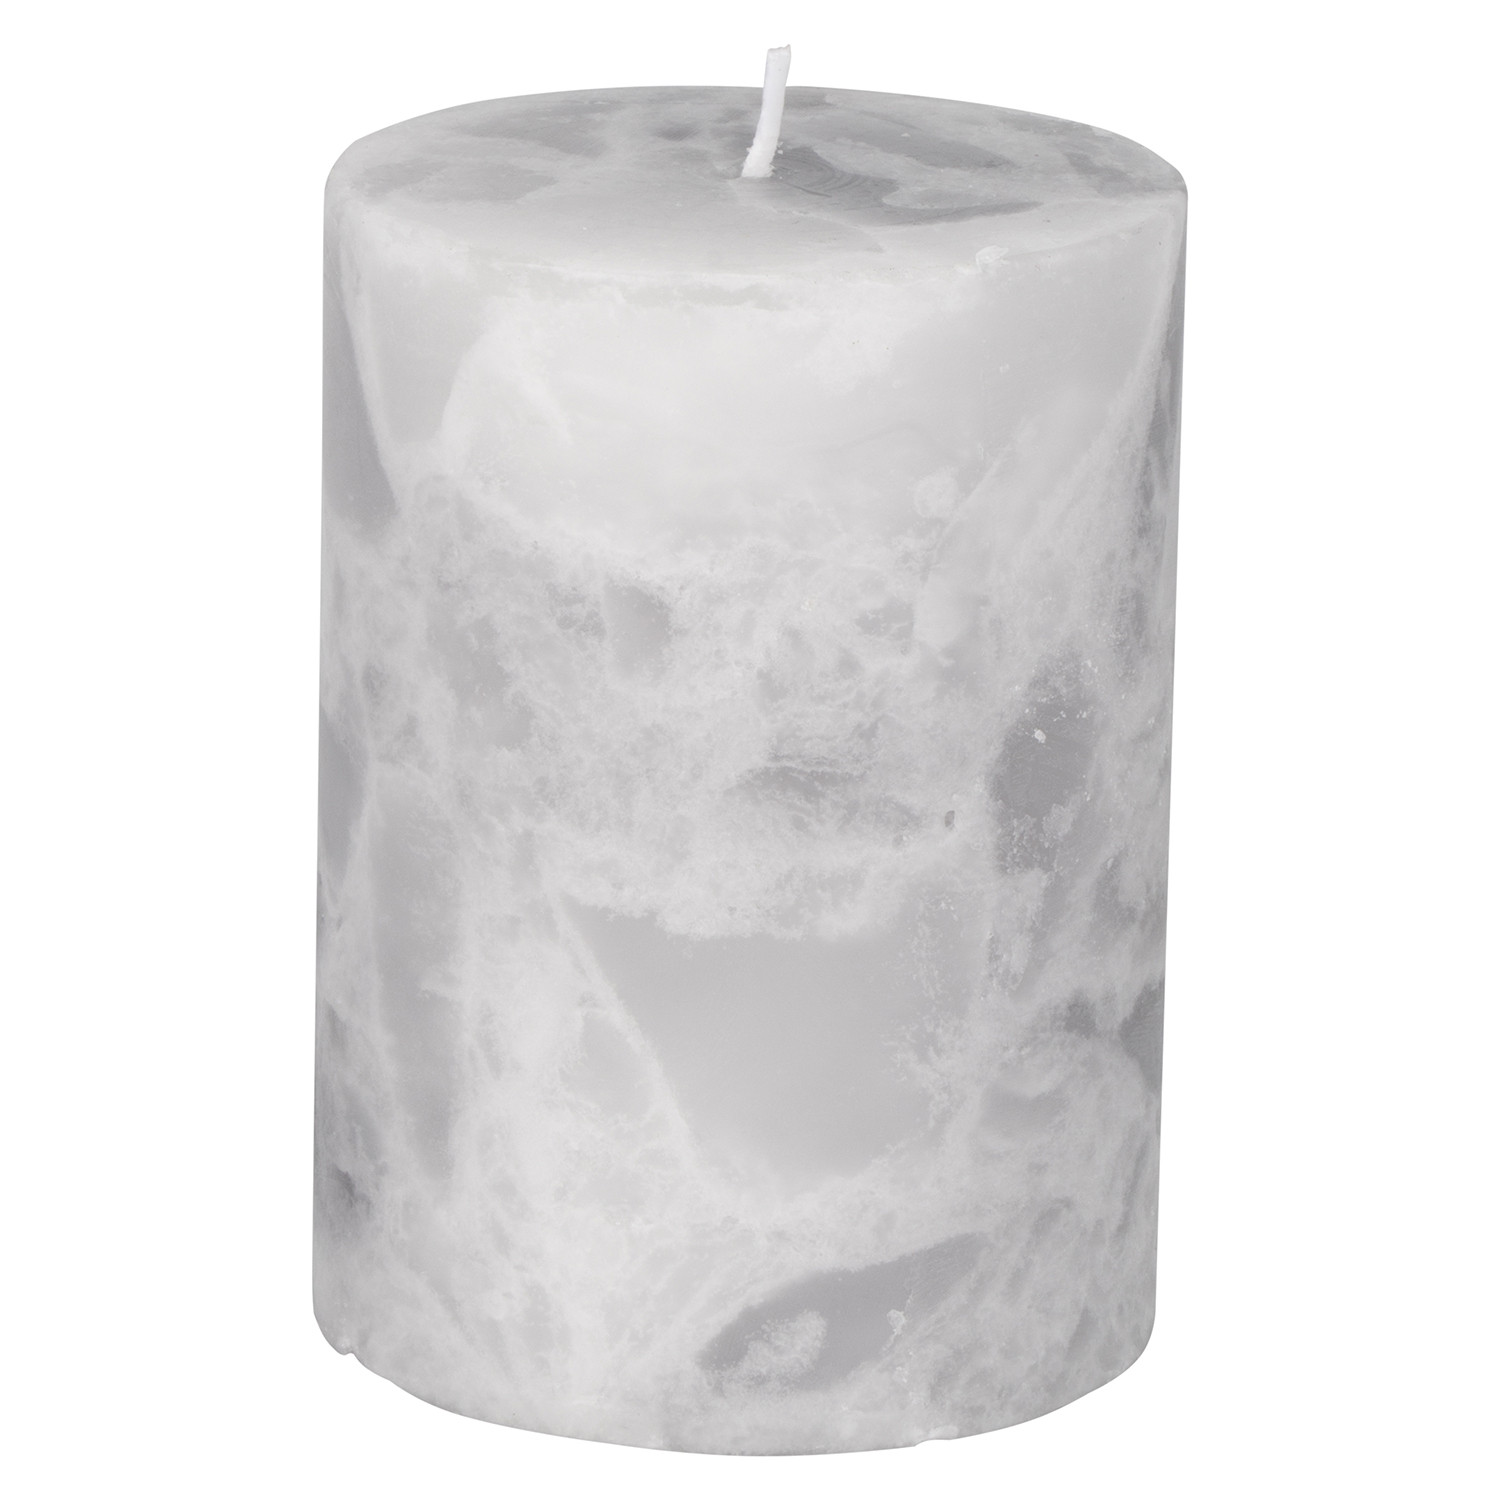 Marble Effect Pillar Candle 35 Hours Burn Time Image